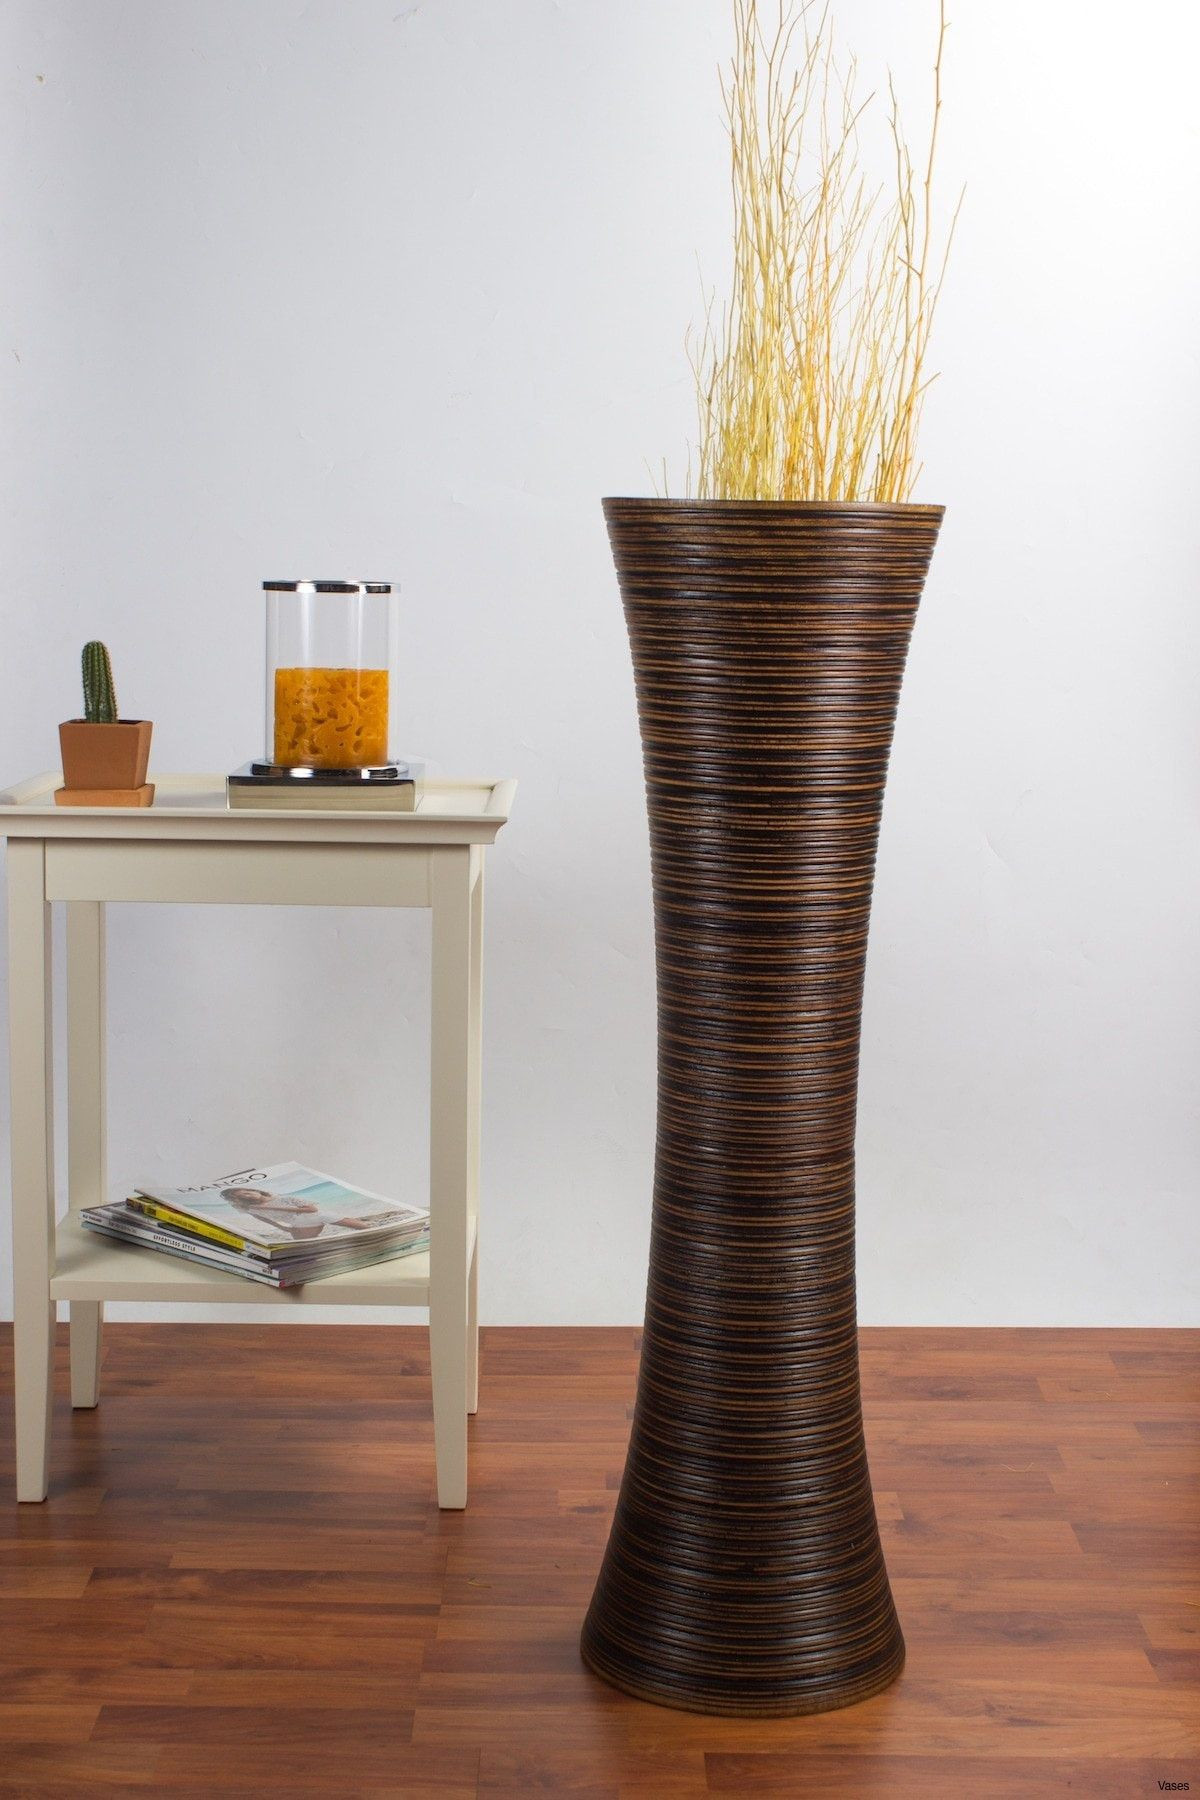 30 Recommended Tall Decorative Vases 2024 free download tall decorative vases of tall decorative vases luxury decorative floor vases fresh d dkbrw in tall decorative vases luxury decorative floor vases fresh d dkbrw 5749 1h vases tall brown i